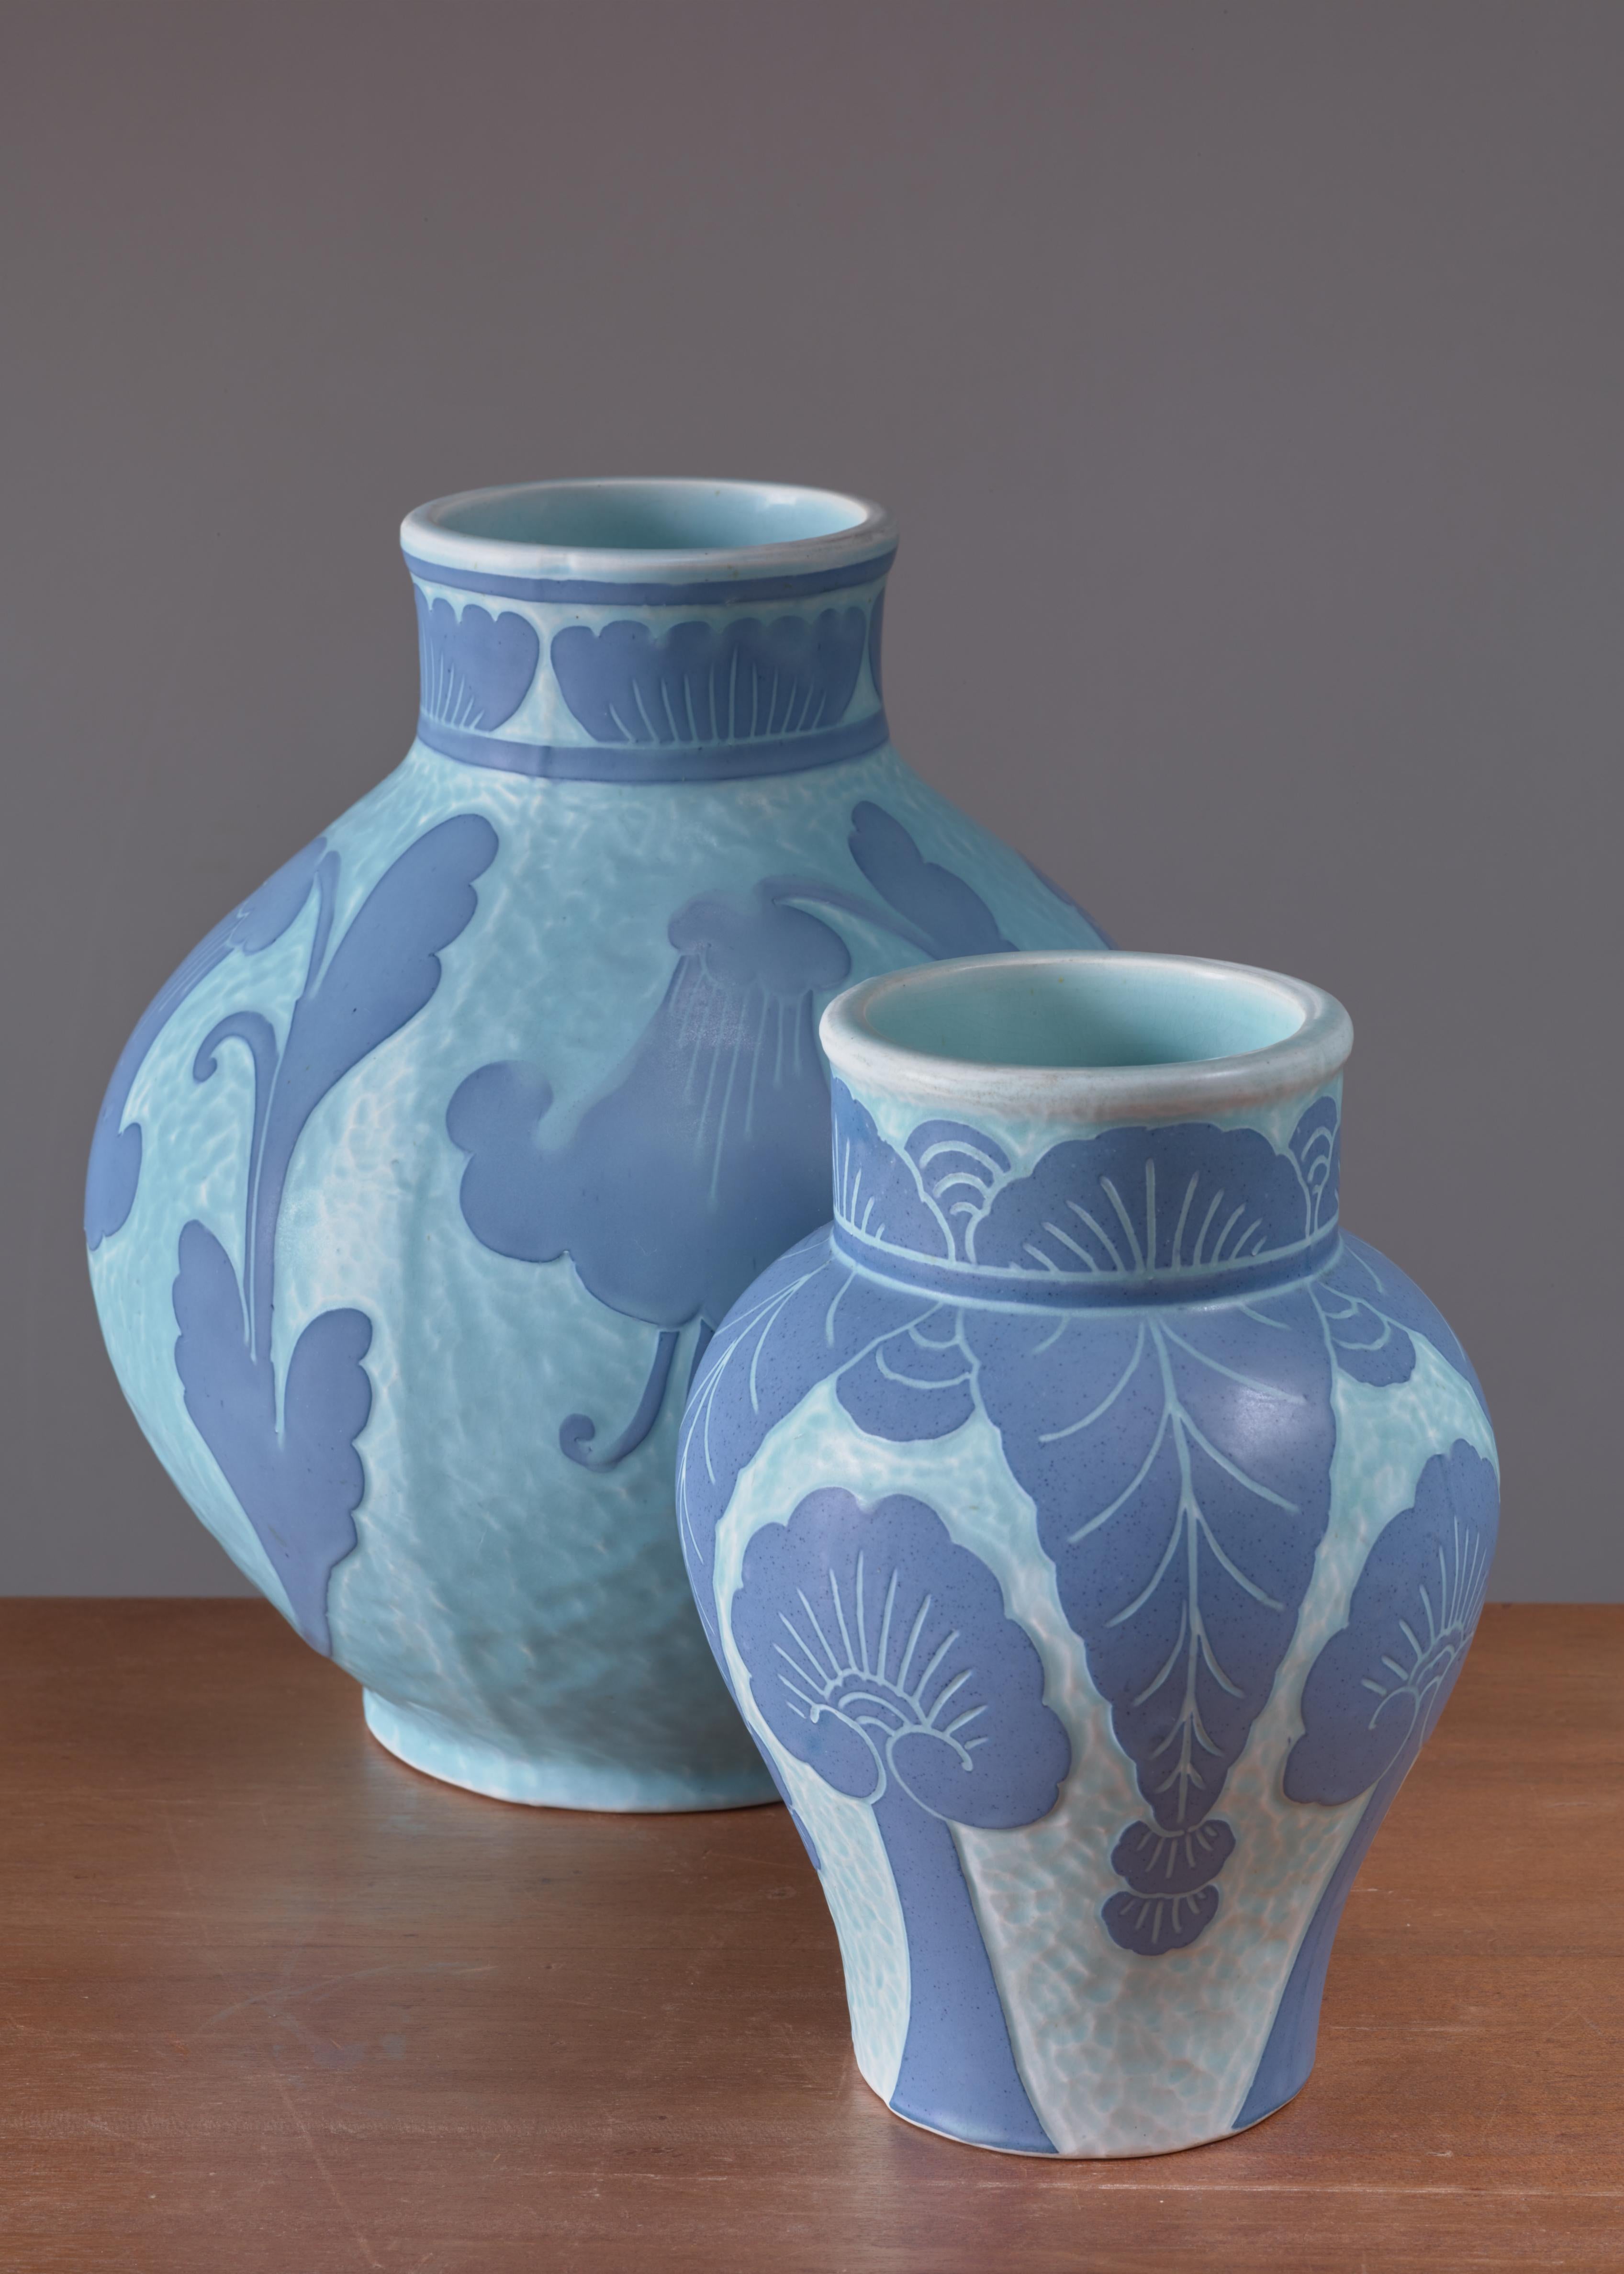 A pair of blue ceramic 'Sgraffito' vases, decorated with a floral motif, by Josef Ekberg for Gustavsberg. 
The measurements stated are of the largest vase. The other vase is 21 cm (8 inch) high and has a 14 cm (5.5 inch) diameter.

Both vases are